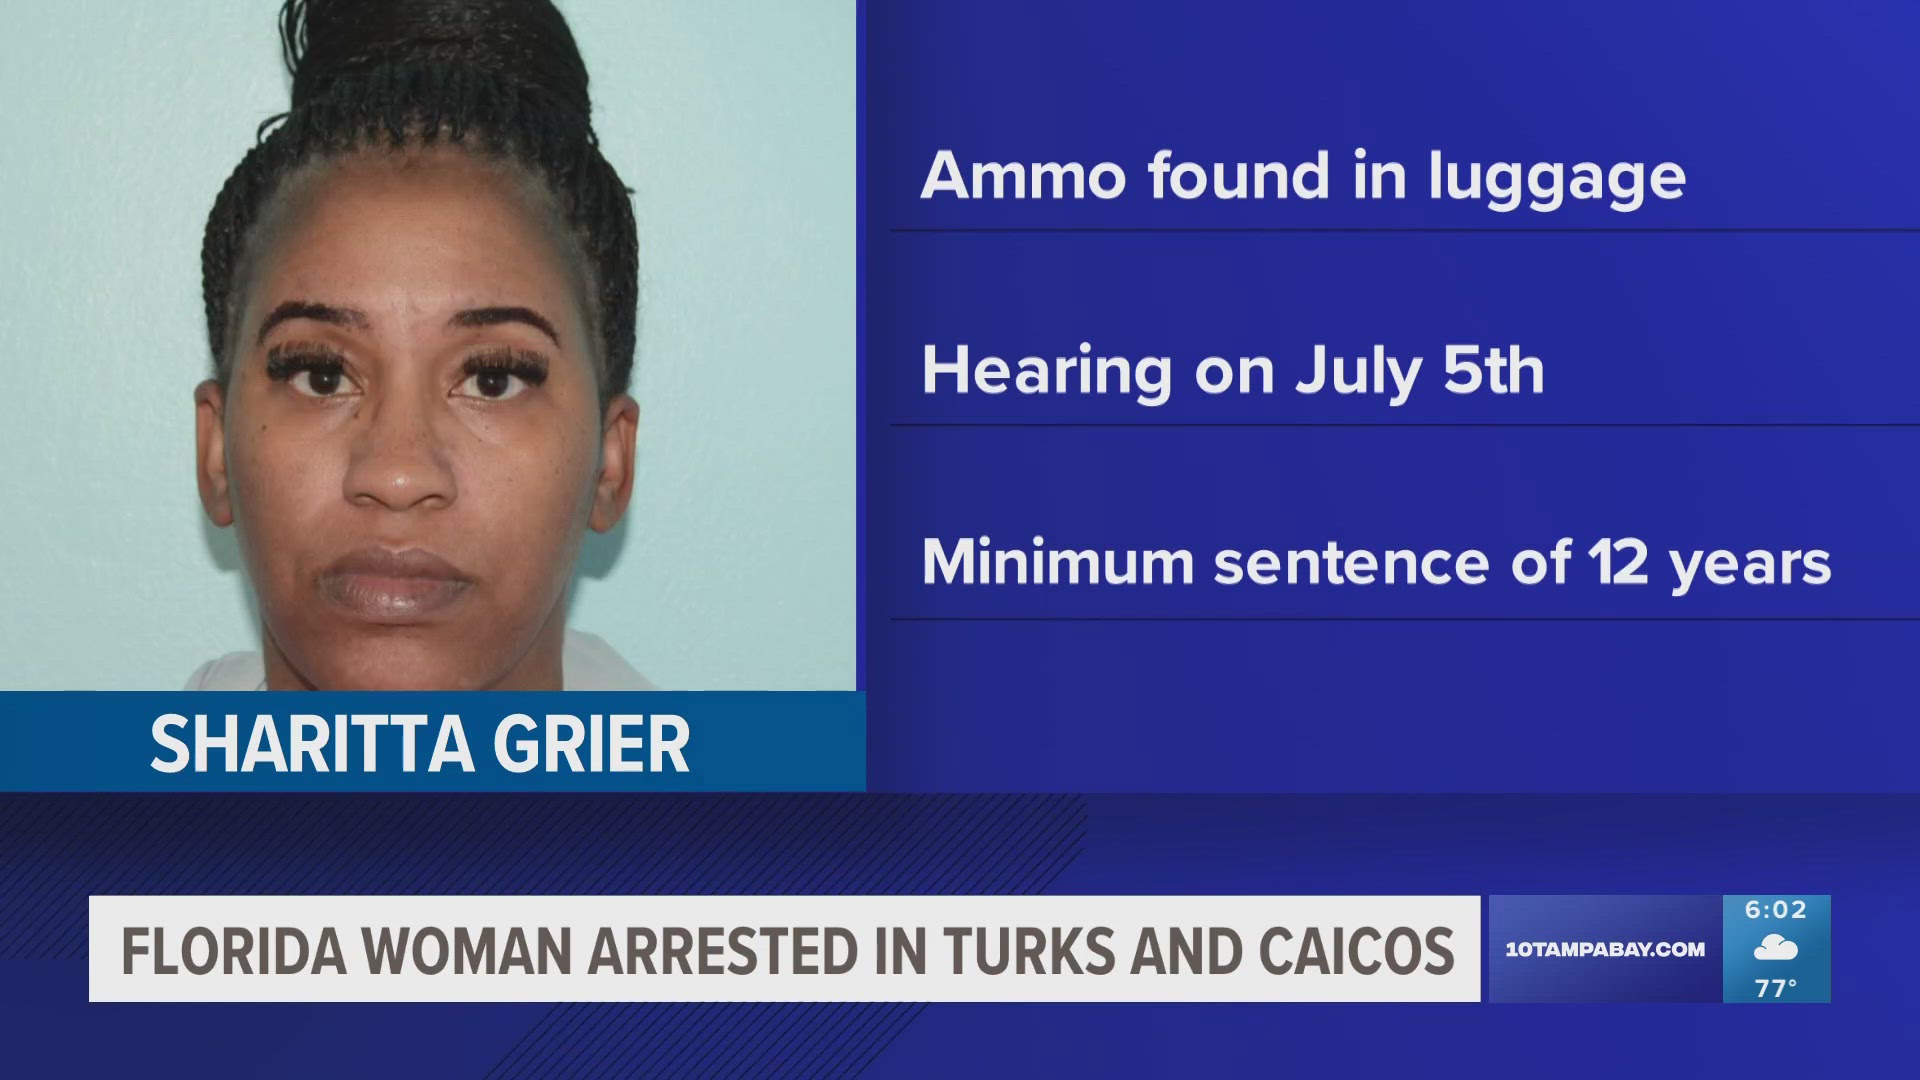 Sharitta Grier, a 45-year-old Orlando woman, was arrested on Monday after a routine luggage search at the Howard Hamilton International Airport in Providenciales.